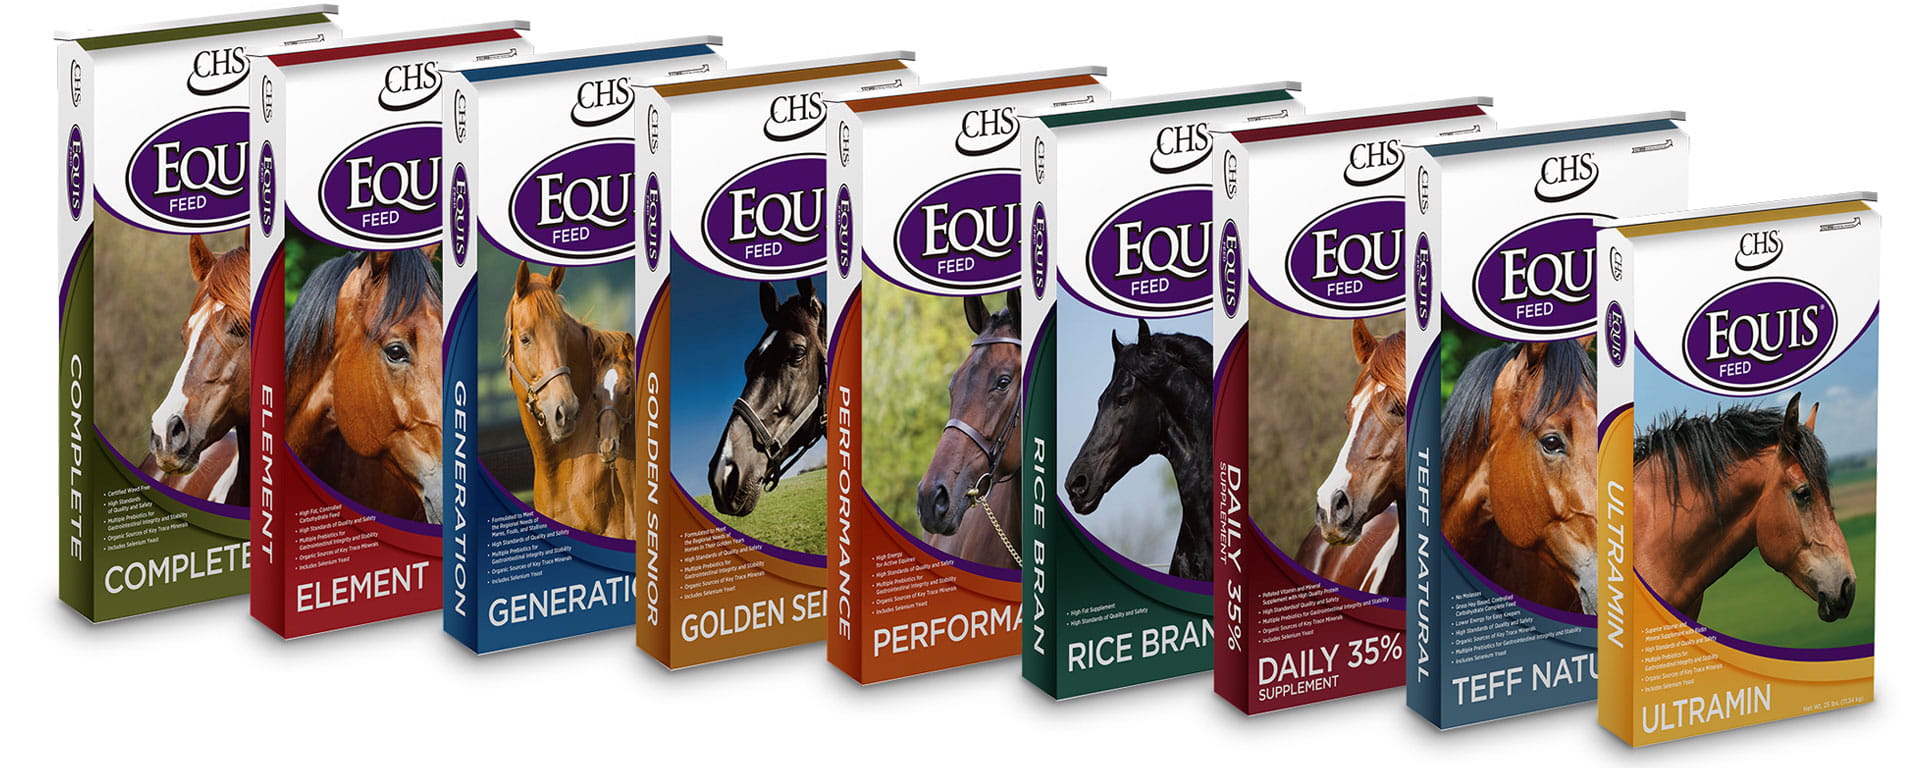 Equis horse feed product bags